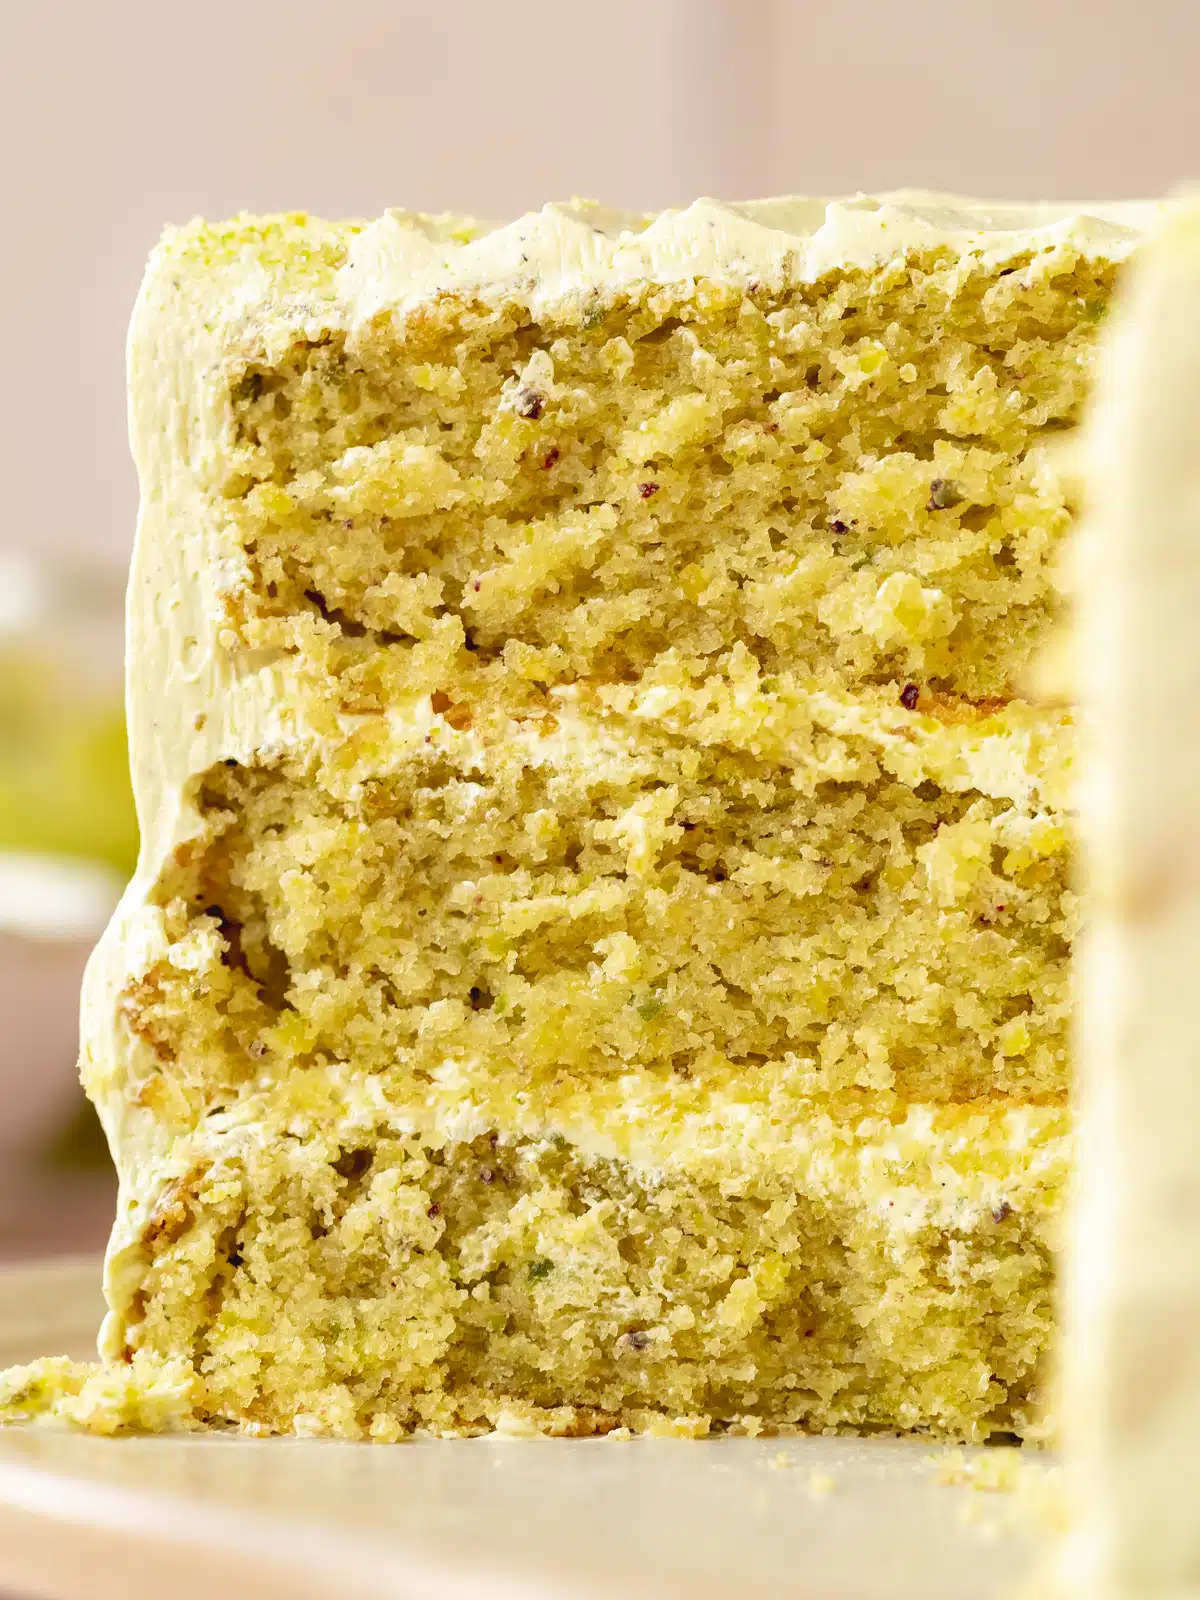 closeup of a vegan pistachio layer cake showing the light and fluffy consistency.